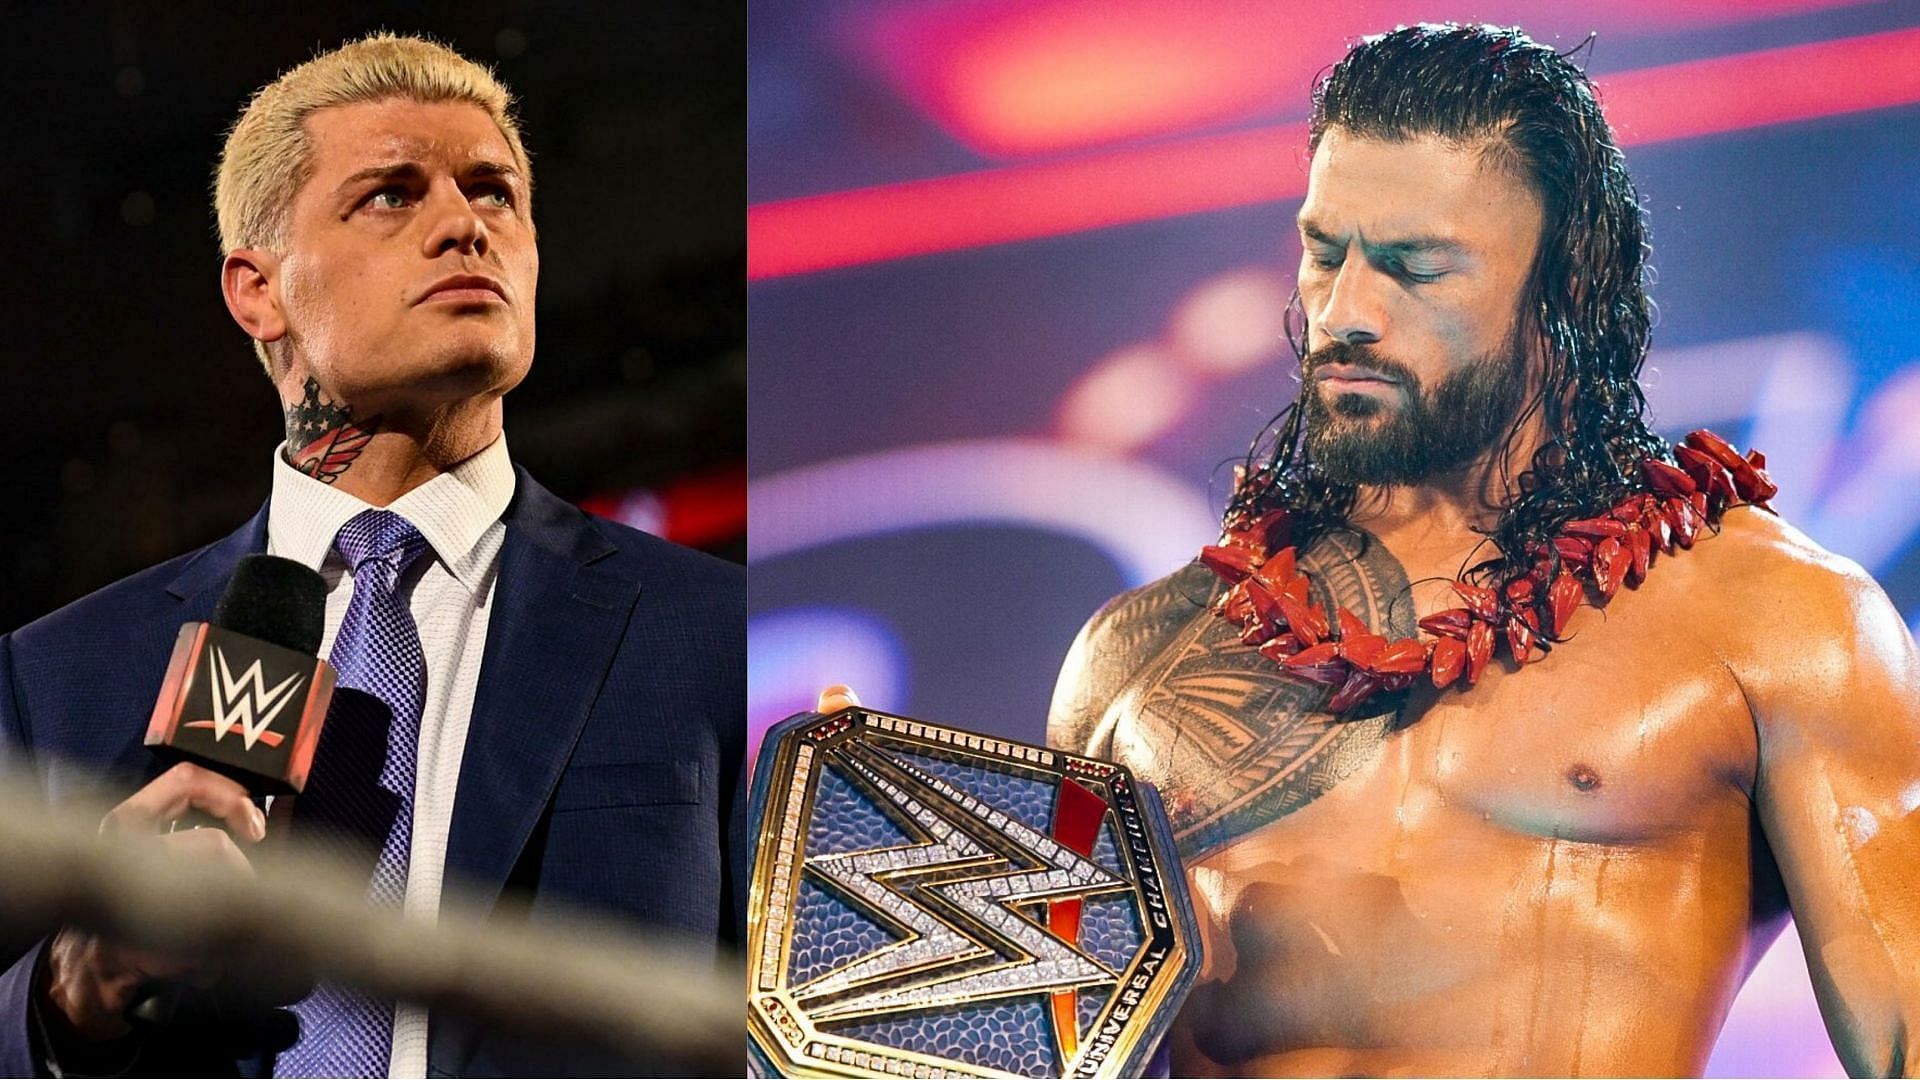 A showdown between &quot;The American Nightmare&quot; and &quot;The Tribal Chief&quot; could happen at WrestleMania 39